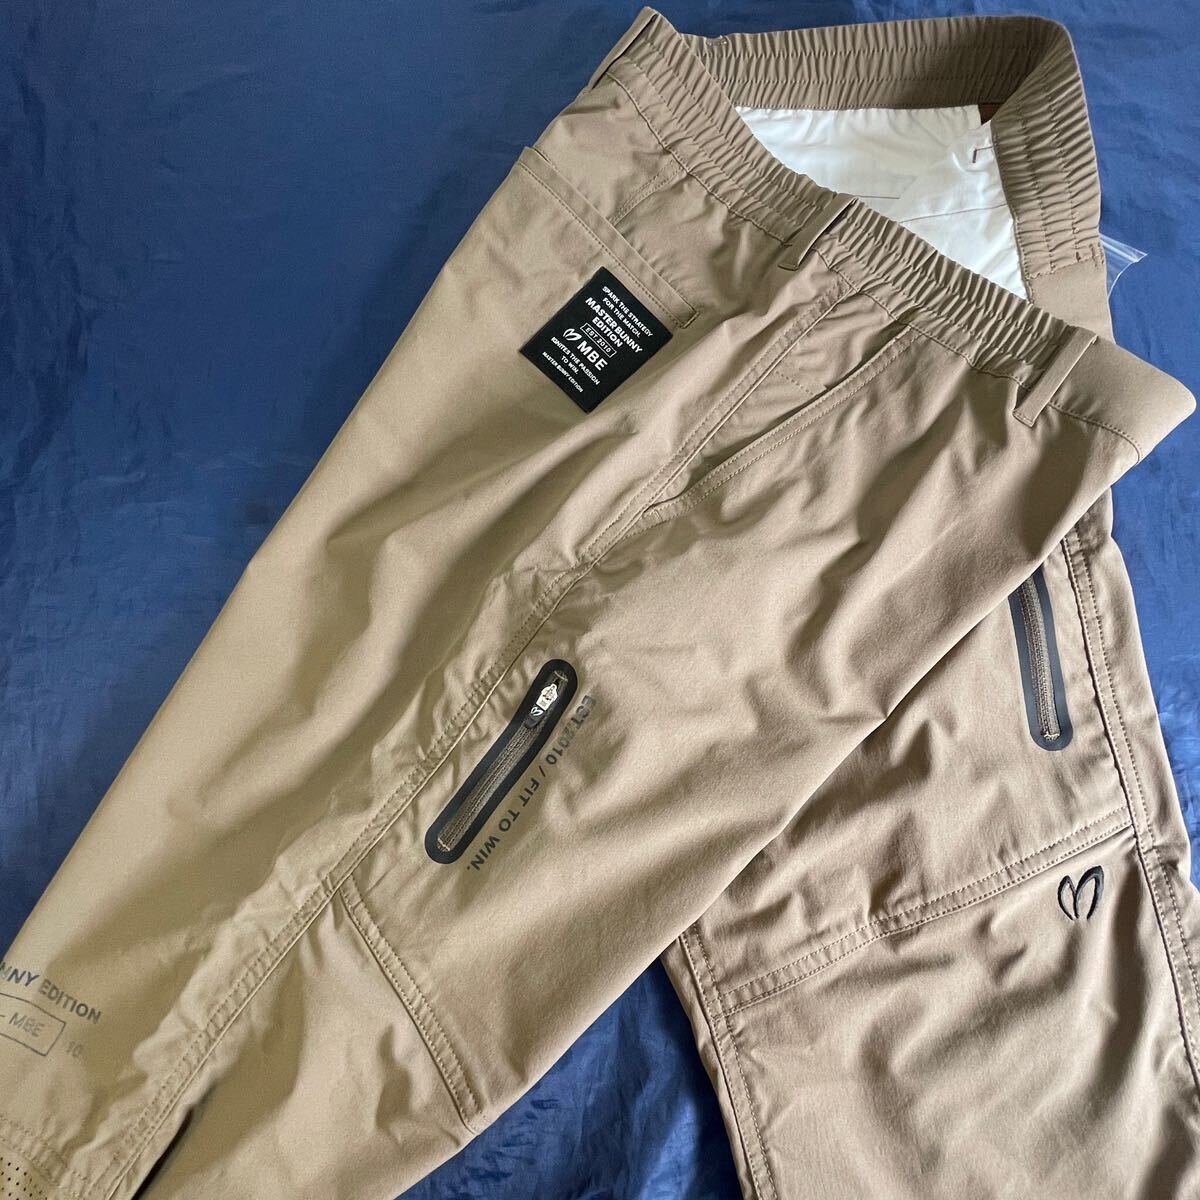  new arrival genuine article new goods 41085195 PEARLY GATES Pearly Gates master ba knee 5(L) super popular polyester tough ta stretch pants water-repellent . water speed .